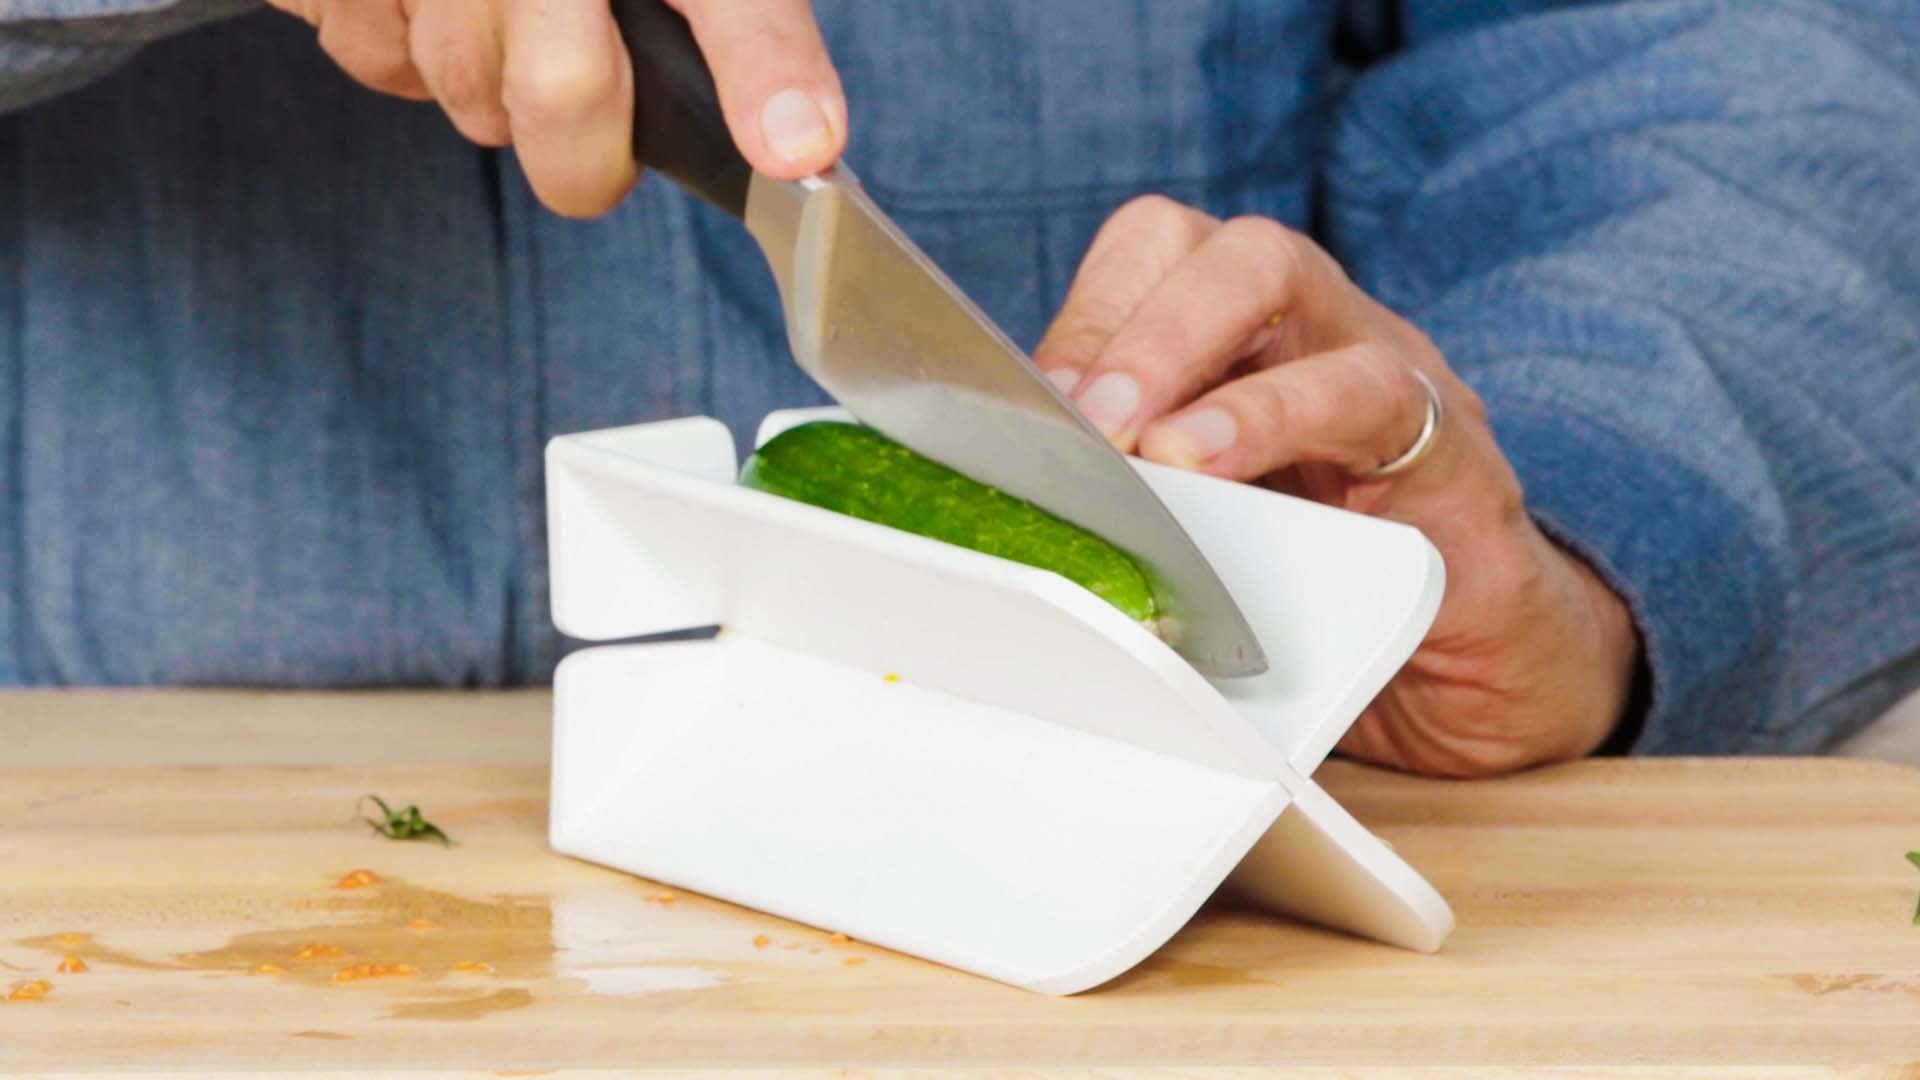 Watch 5 Cheese Gadgets Tested by Design Expert